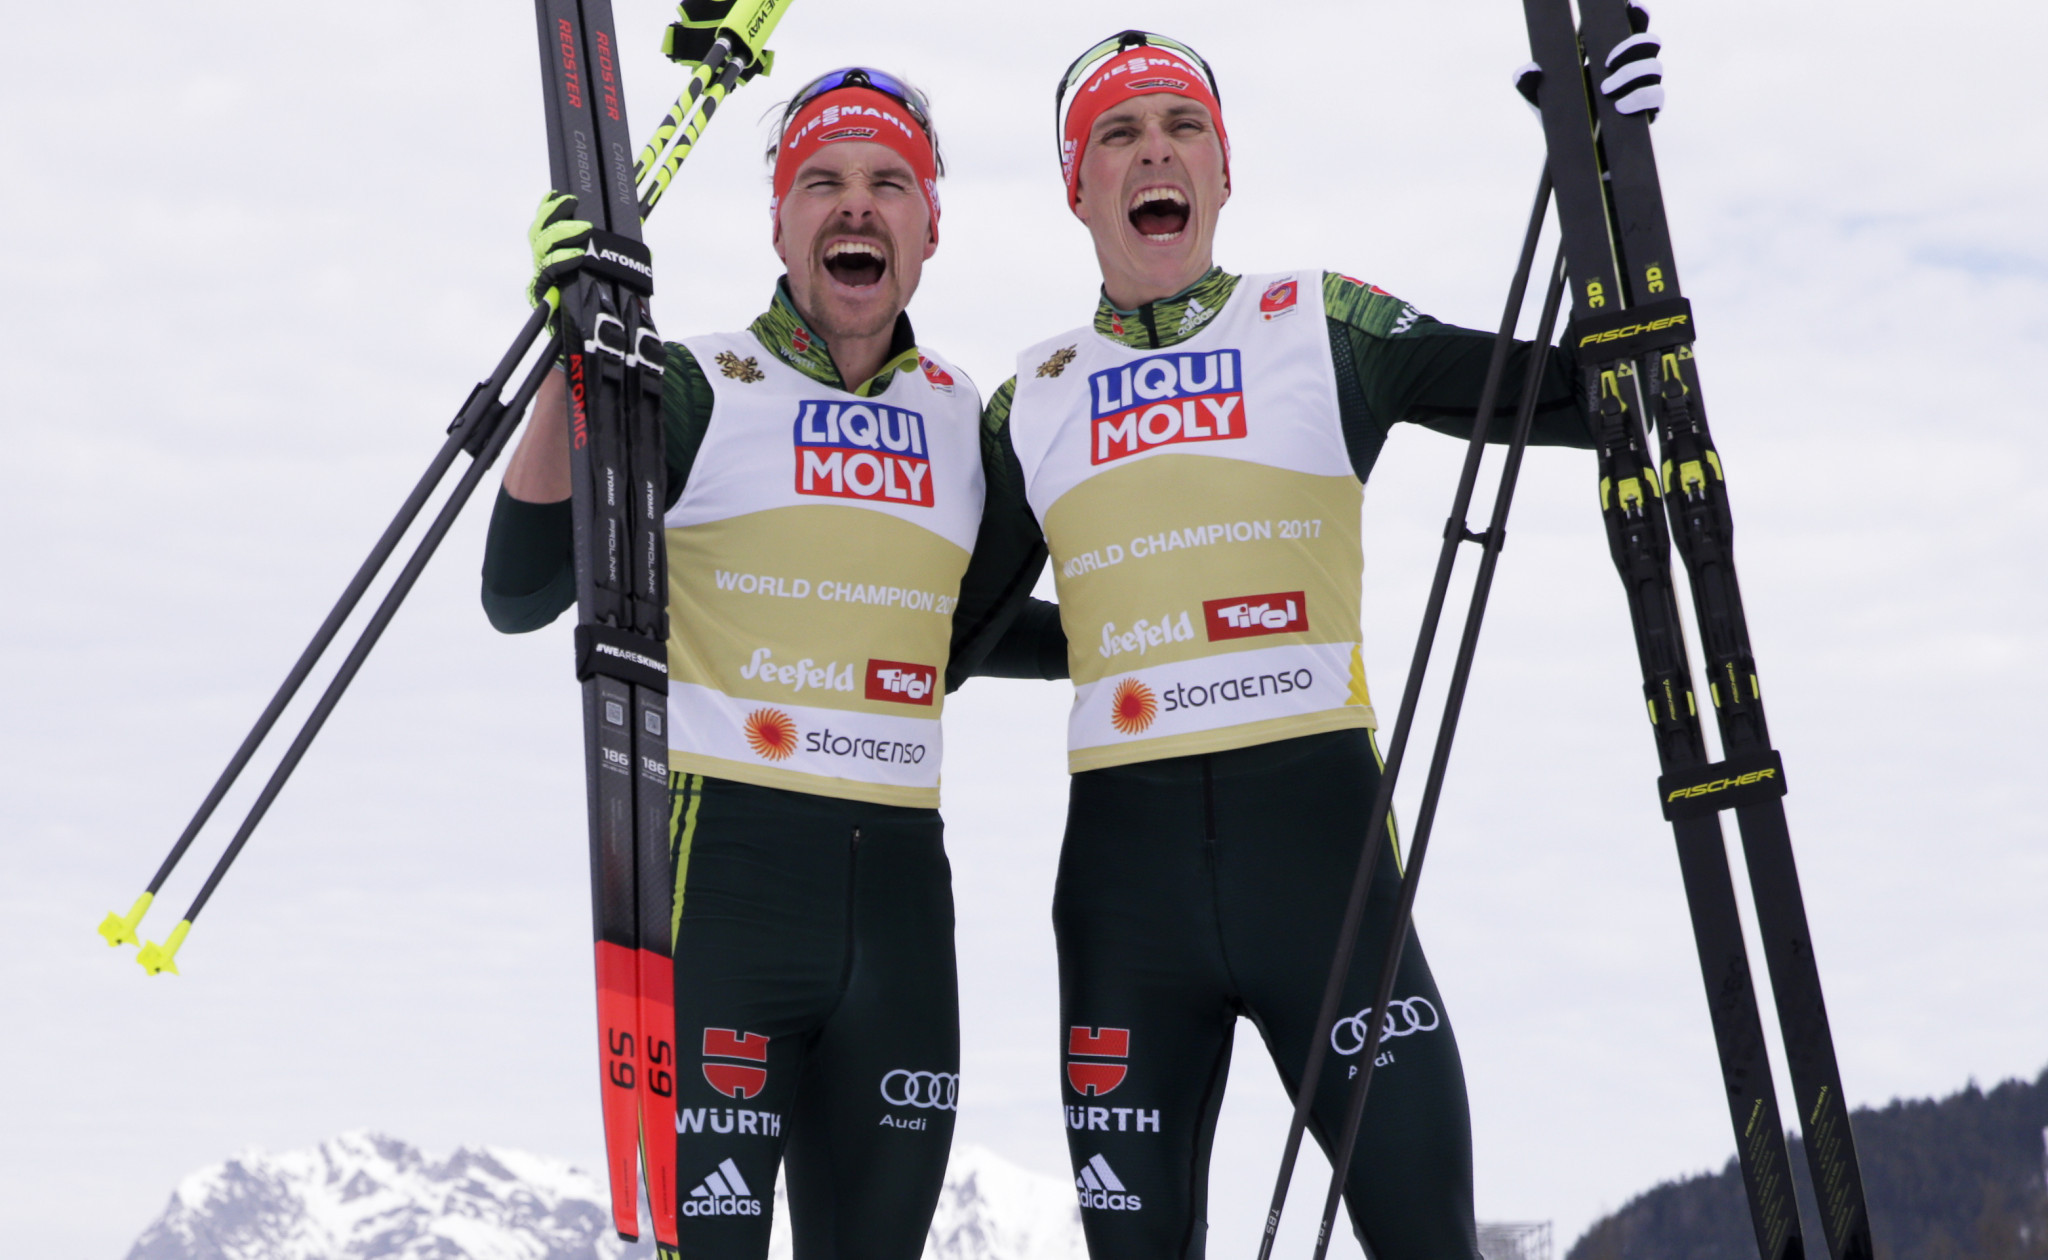 Frenzel and Rießle swoop to claim Nordic Combined World Cup team sprint gold